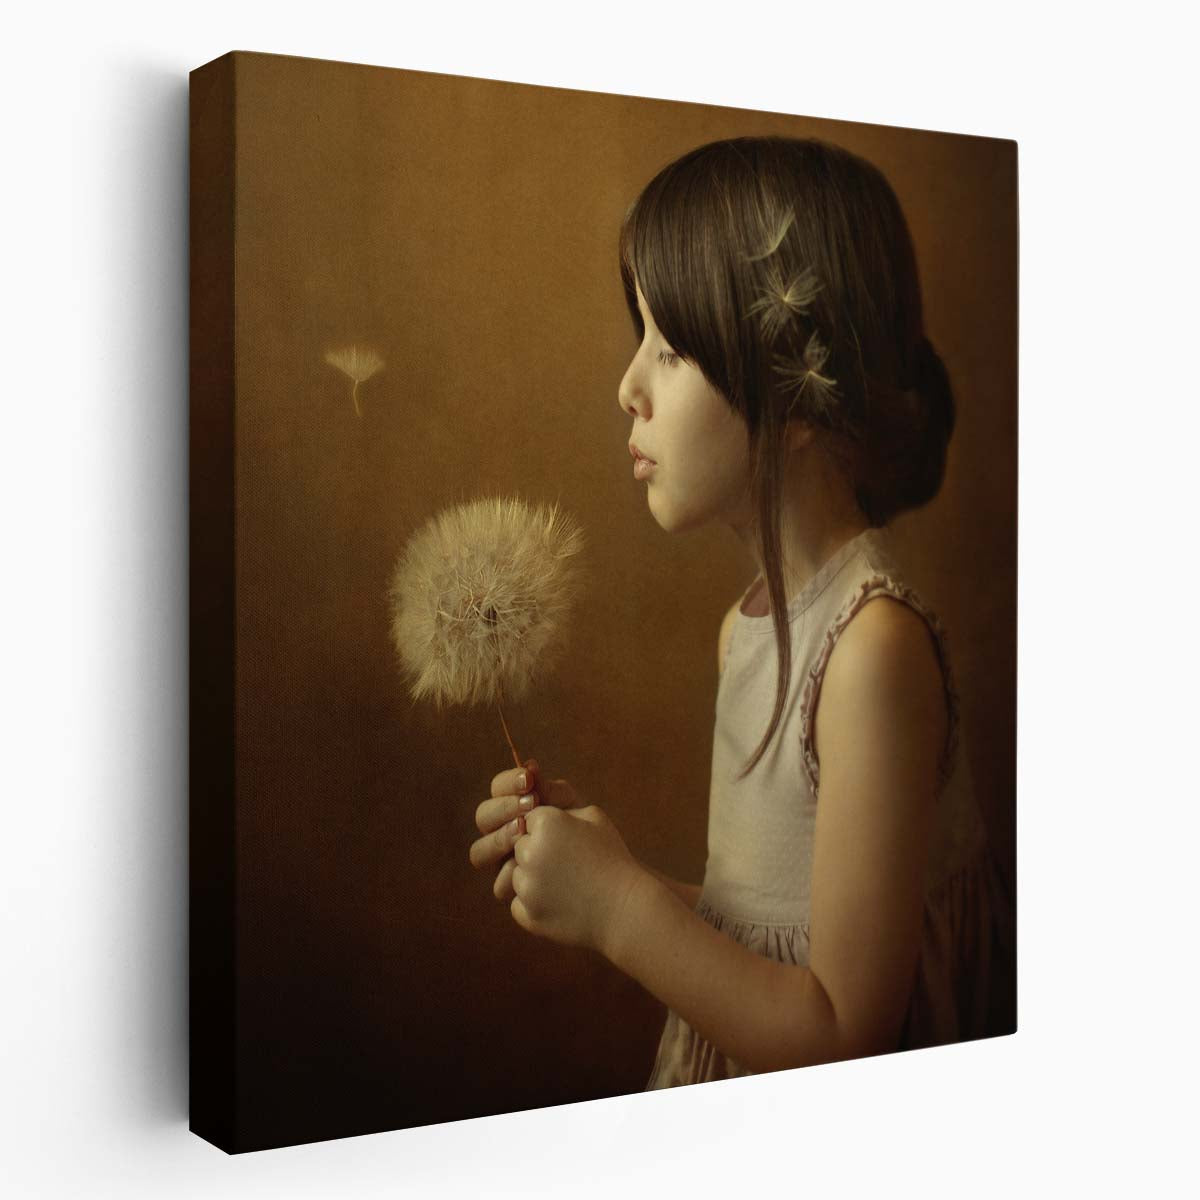 Autumn Serenity Girl Blowing Dandelion Sepia Portrait Wall Art by Luxuriance Designs. Made in USA.